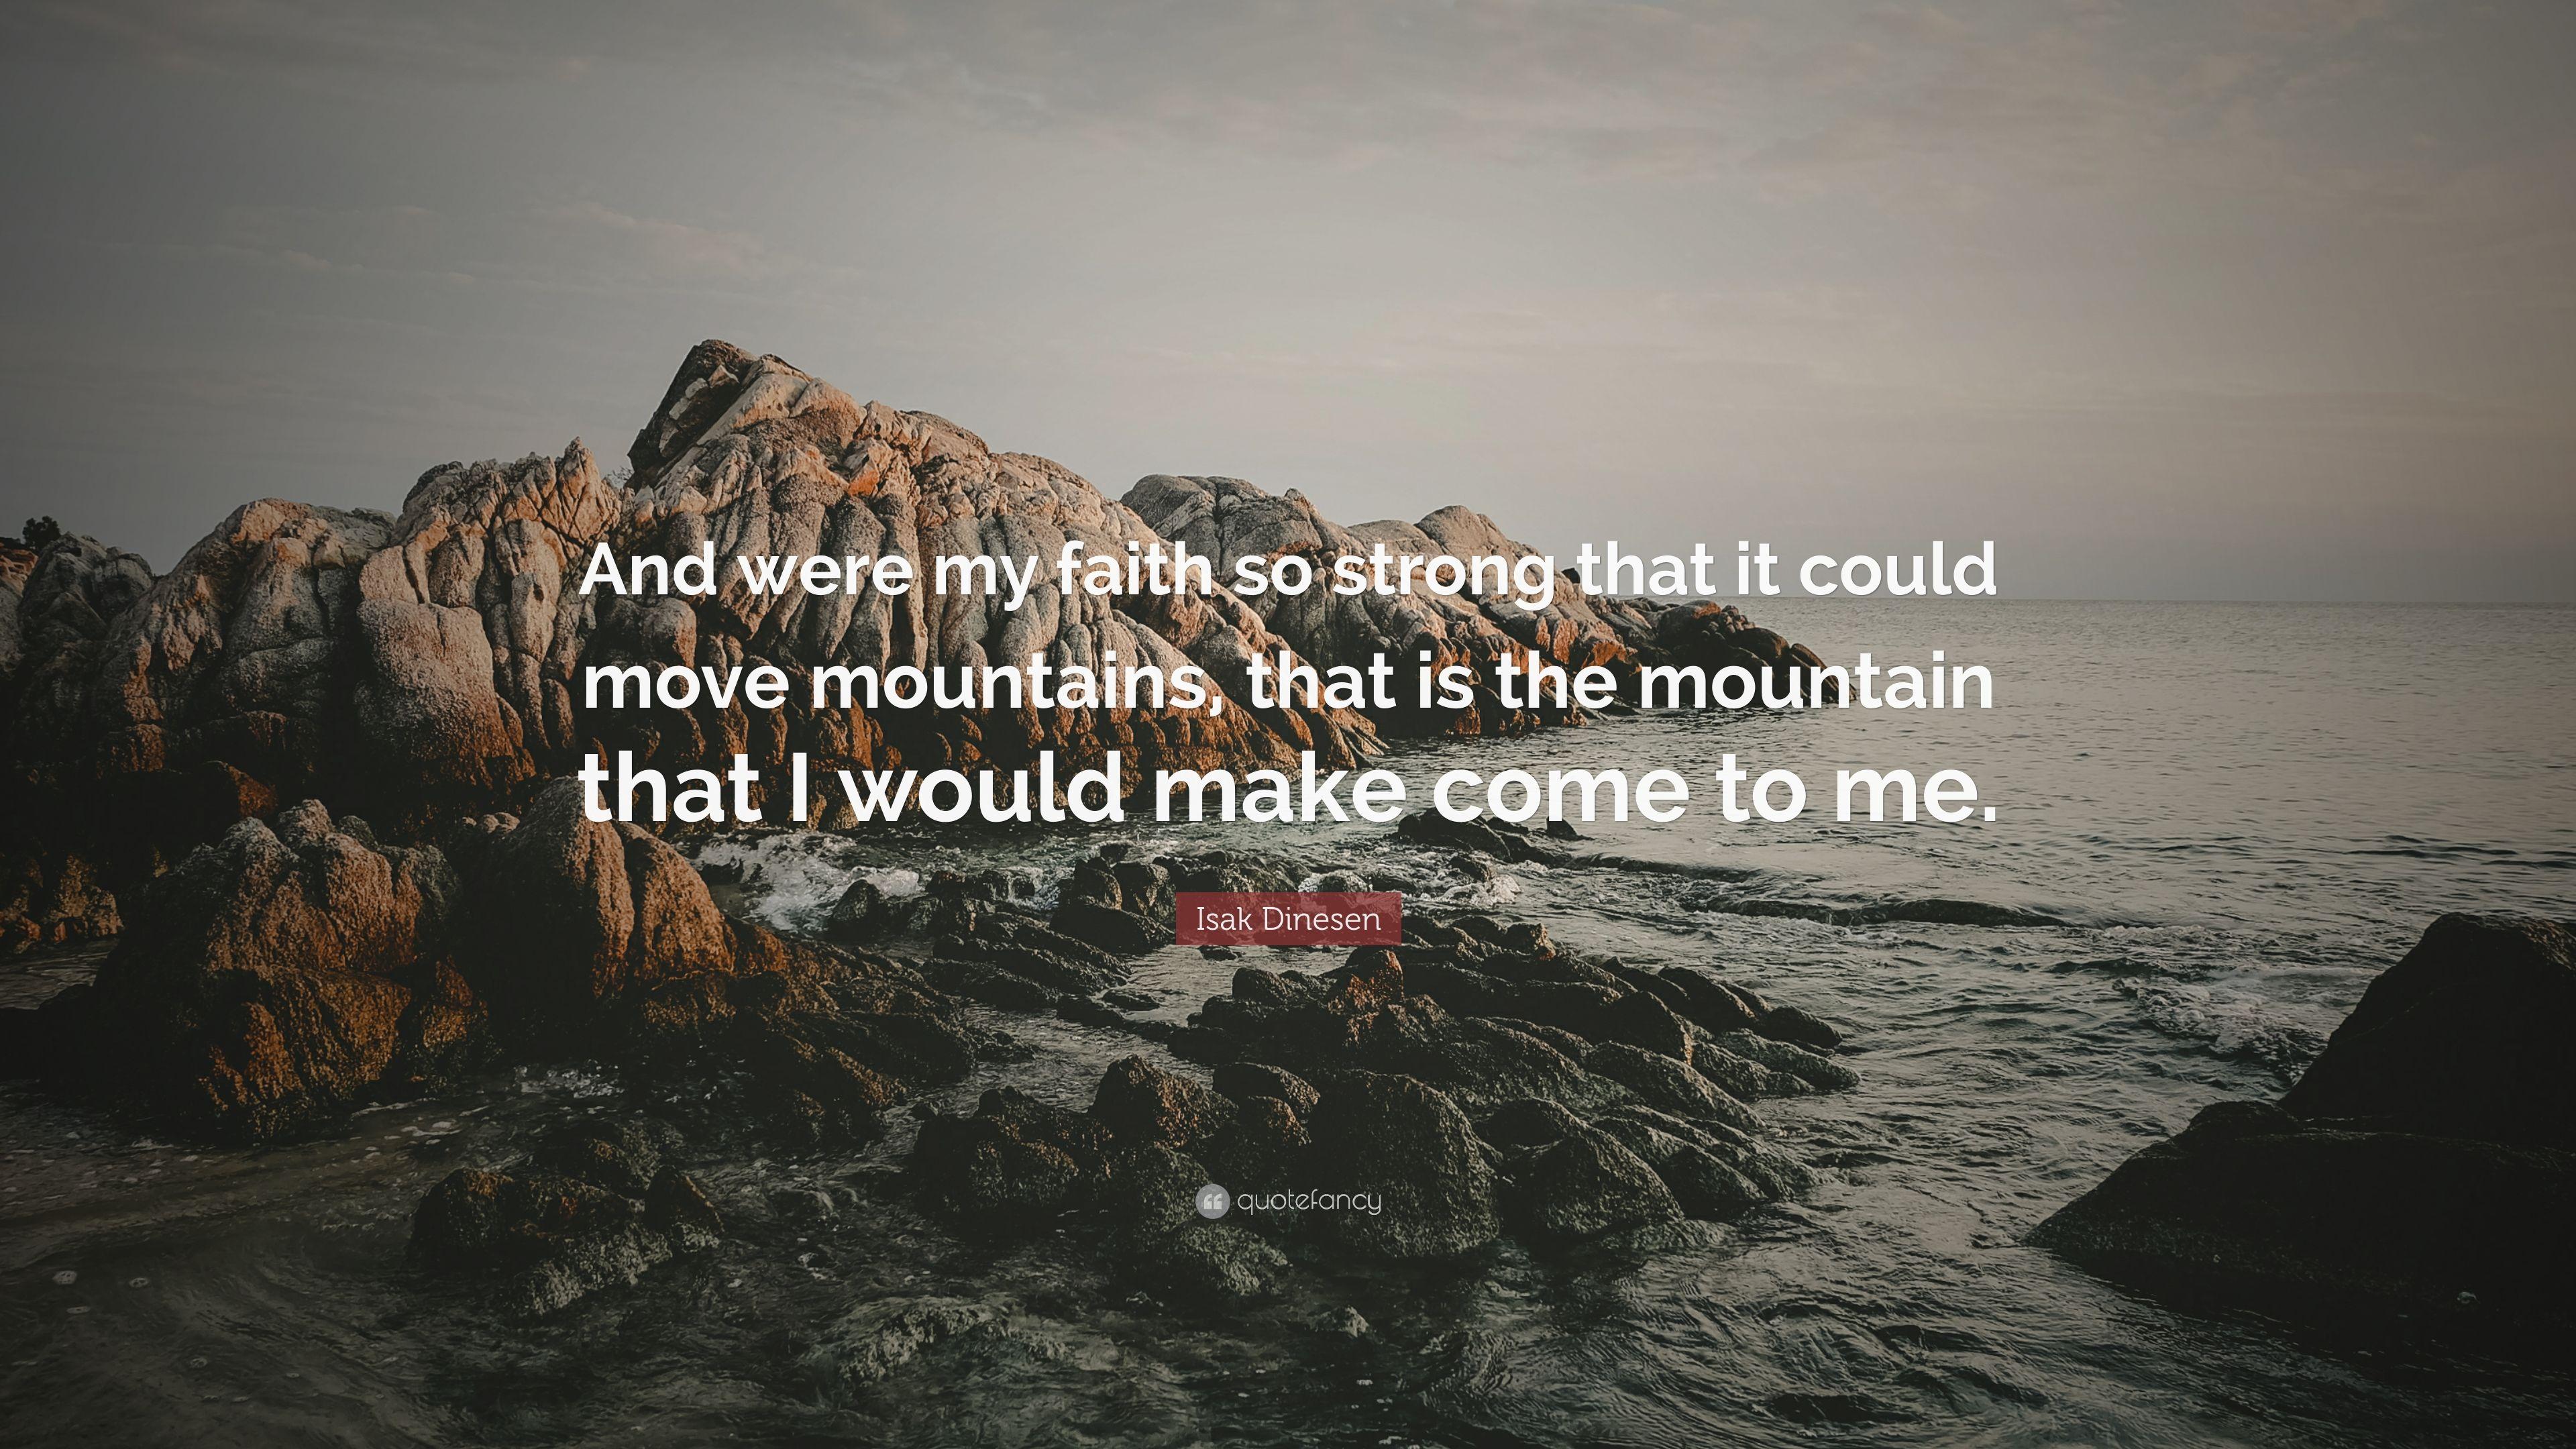 Isak Dinesen Quote: “And were my faith so strong that it could move